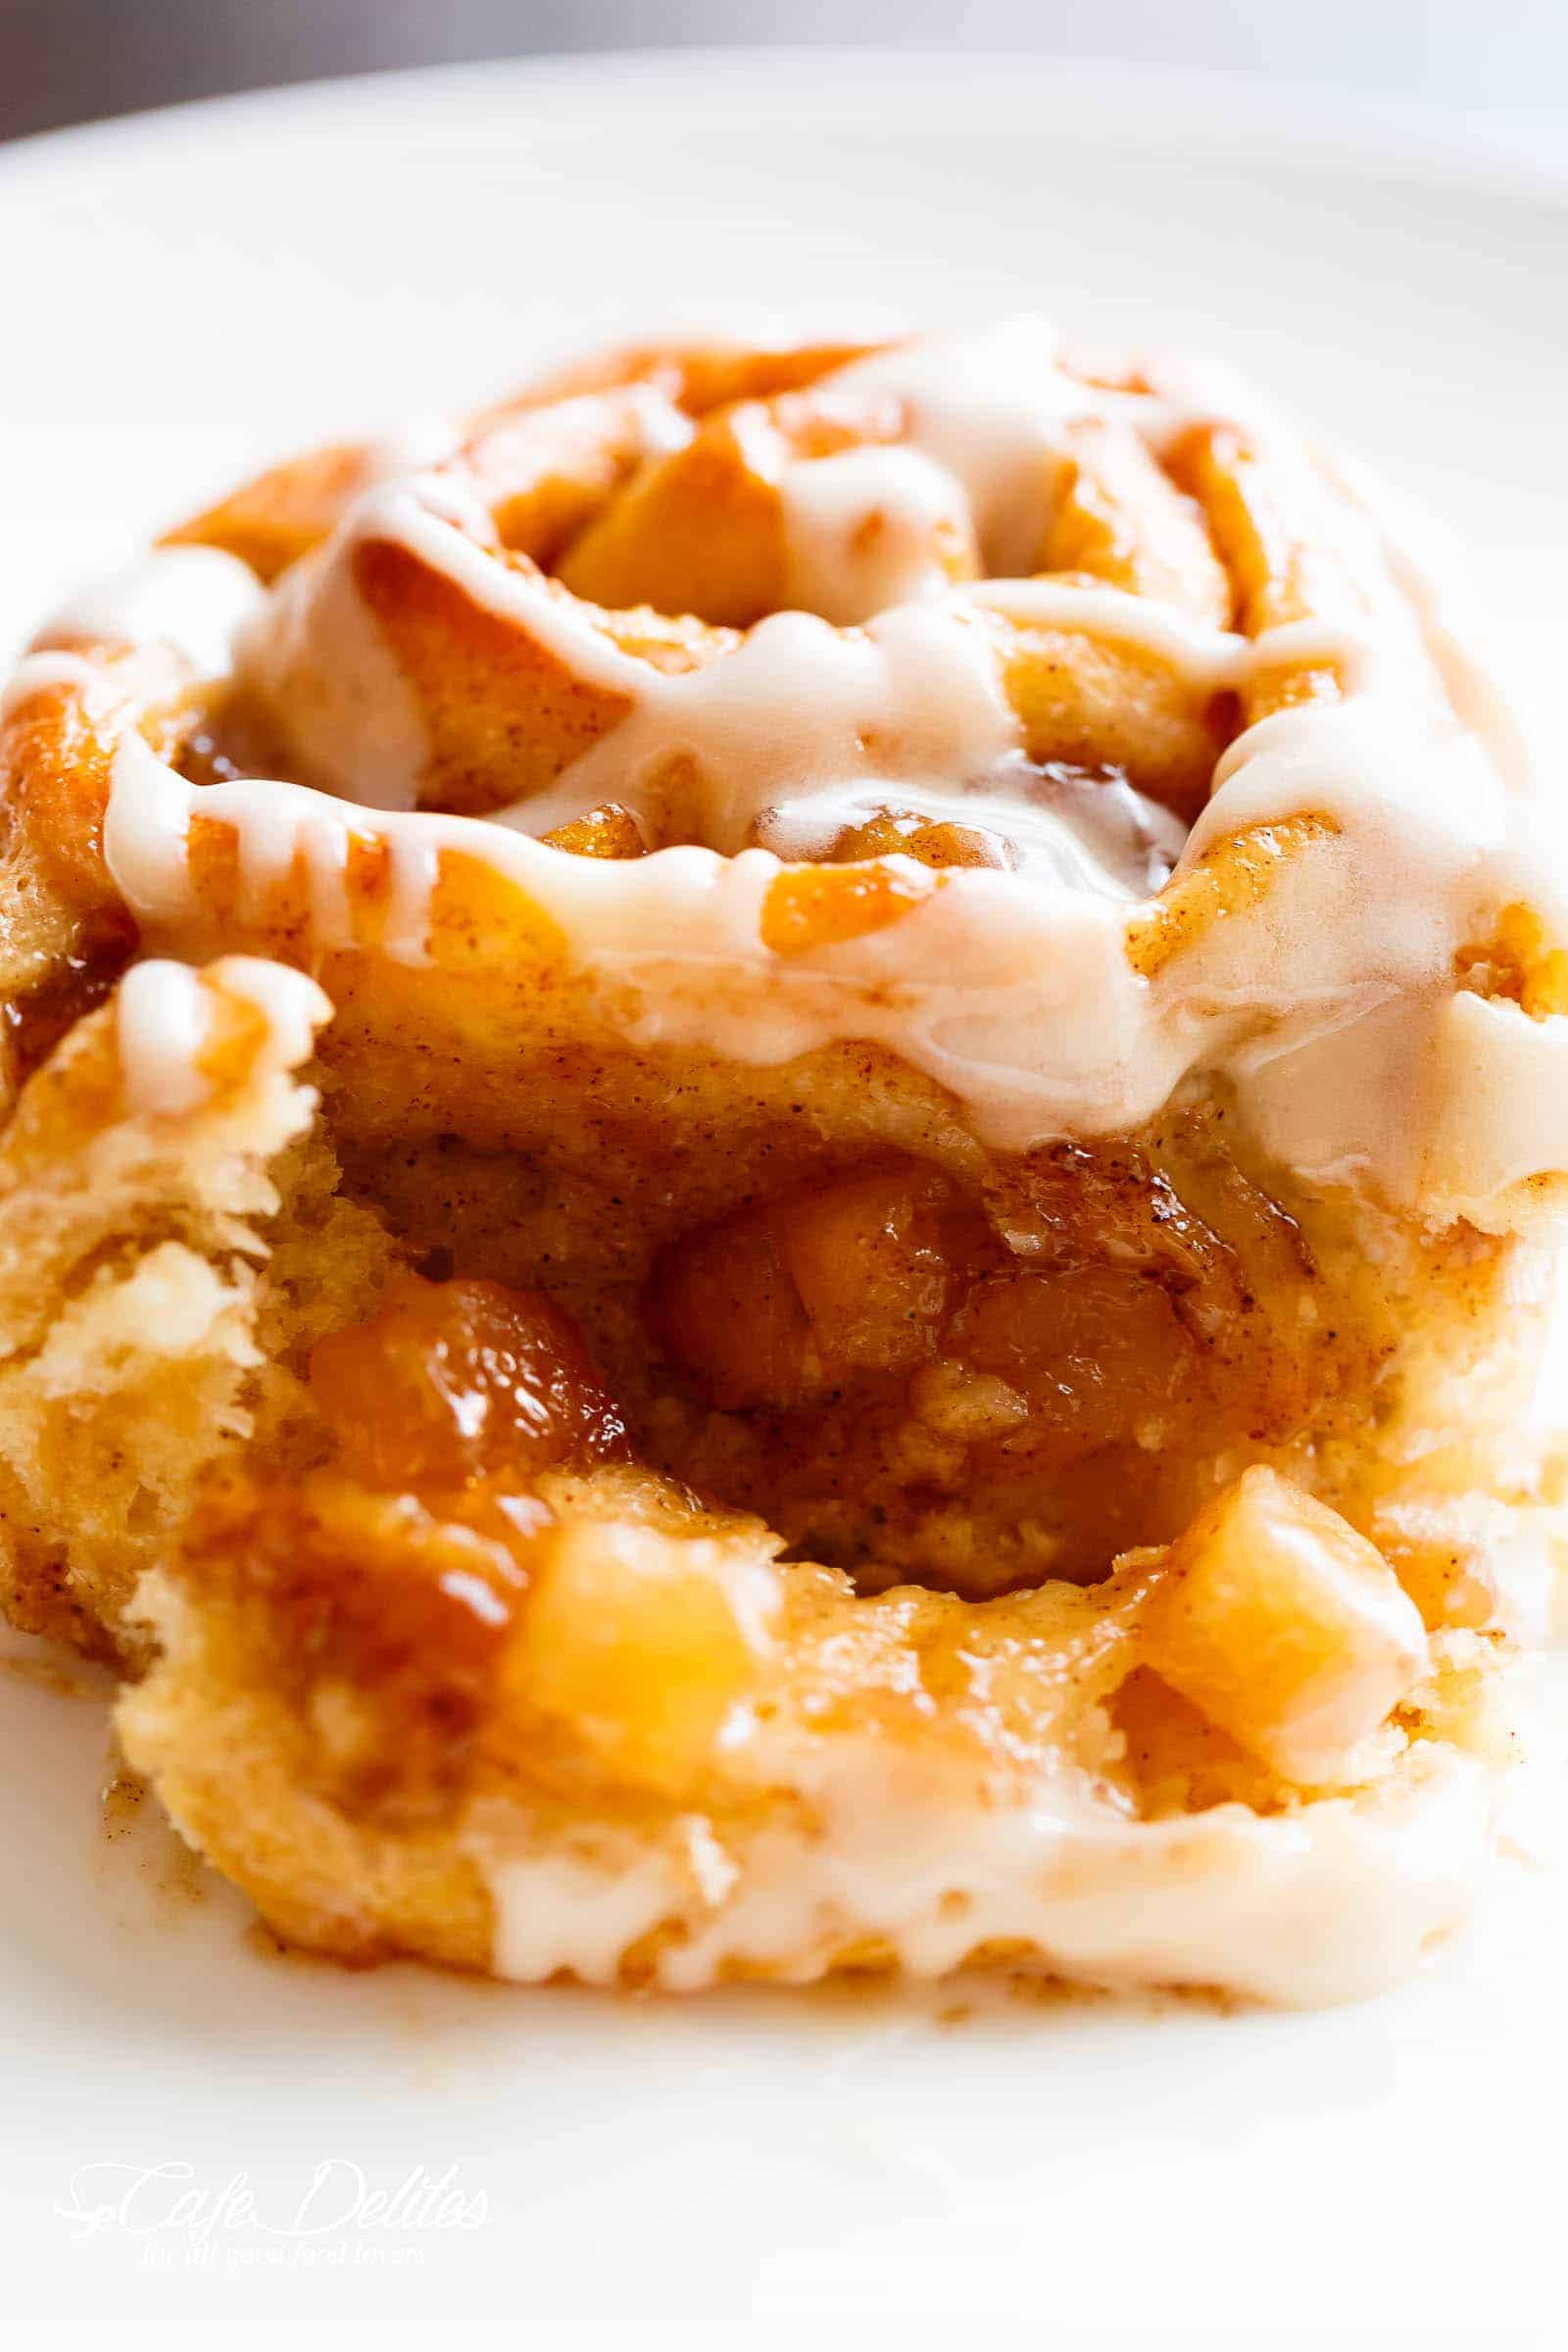 Apple Pie Cinnamon Rolls are soft and fluffy, filled with apple pie filling to make the ultimate twist for your dinner table! | cafedelites.com